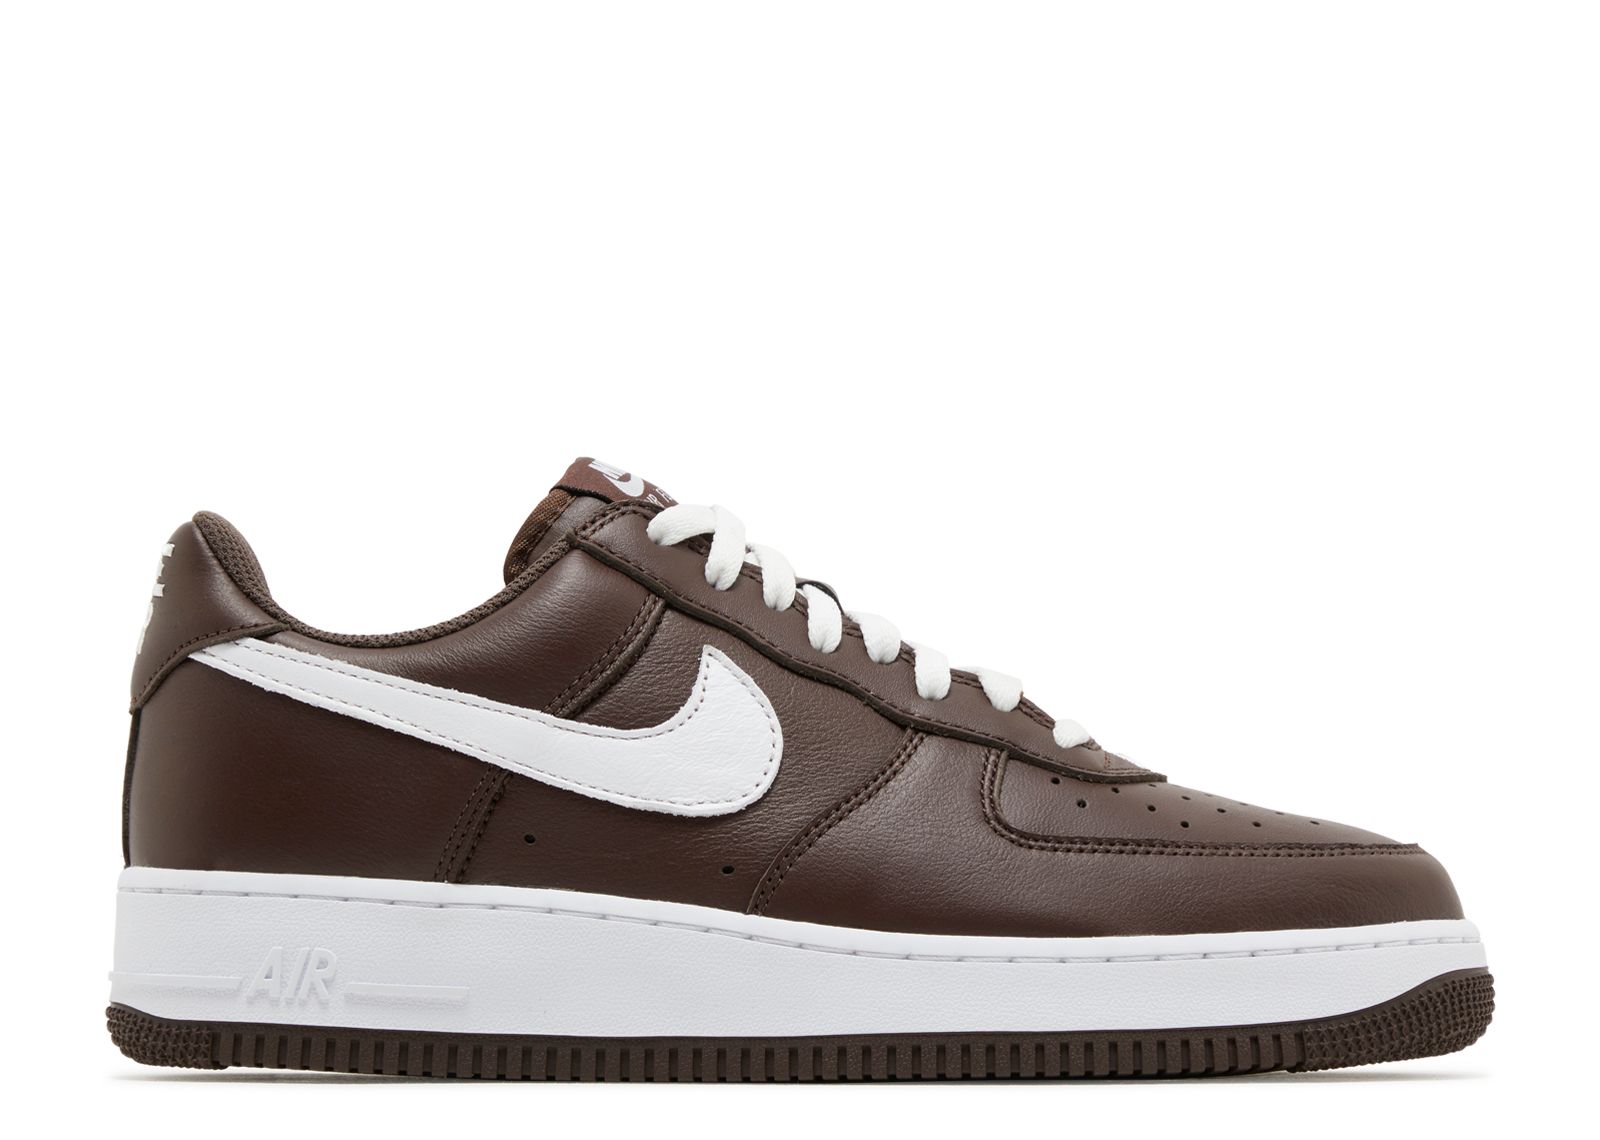 Кроссовки Nike Air Force 1 Low 'Color Of The Month - Chocolate', коричневый original authentic nike air force 1 low mini swoosh men s skateboarding shoes sport outdoor sneakers 2018 new arrival 823511 603